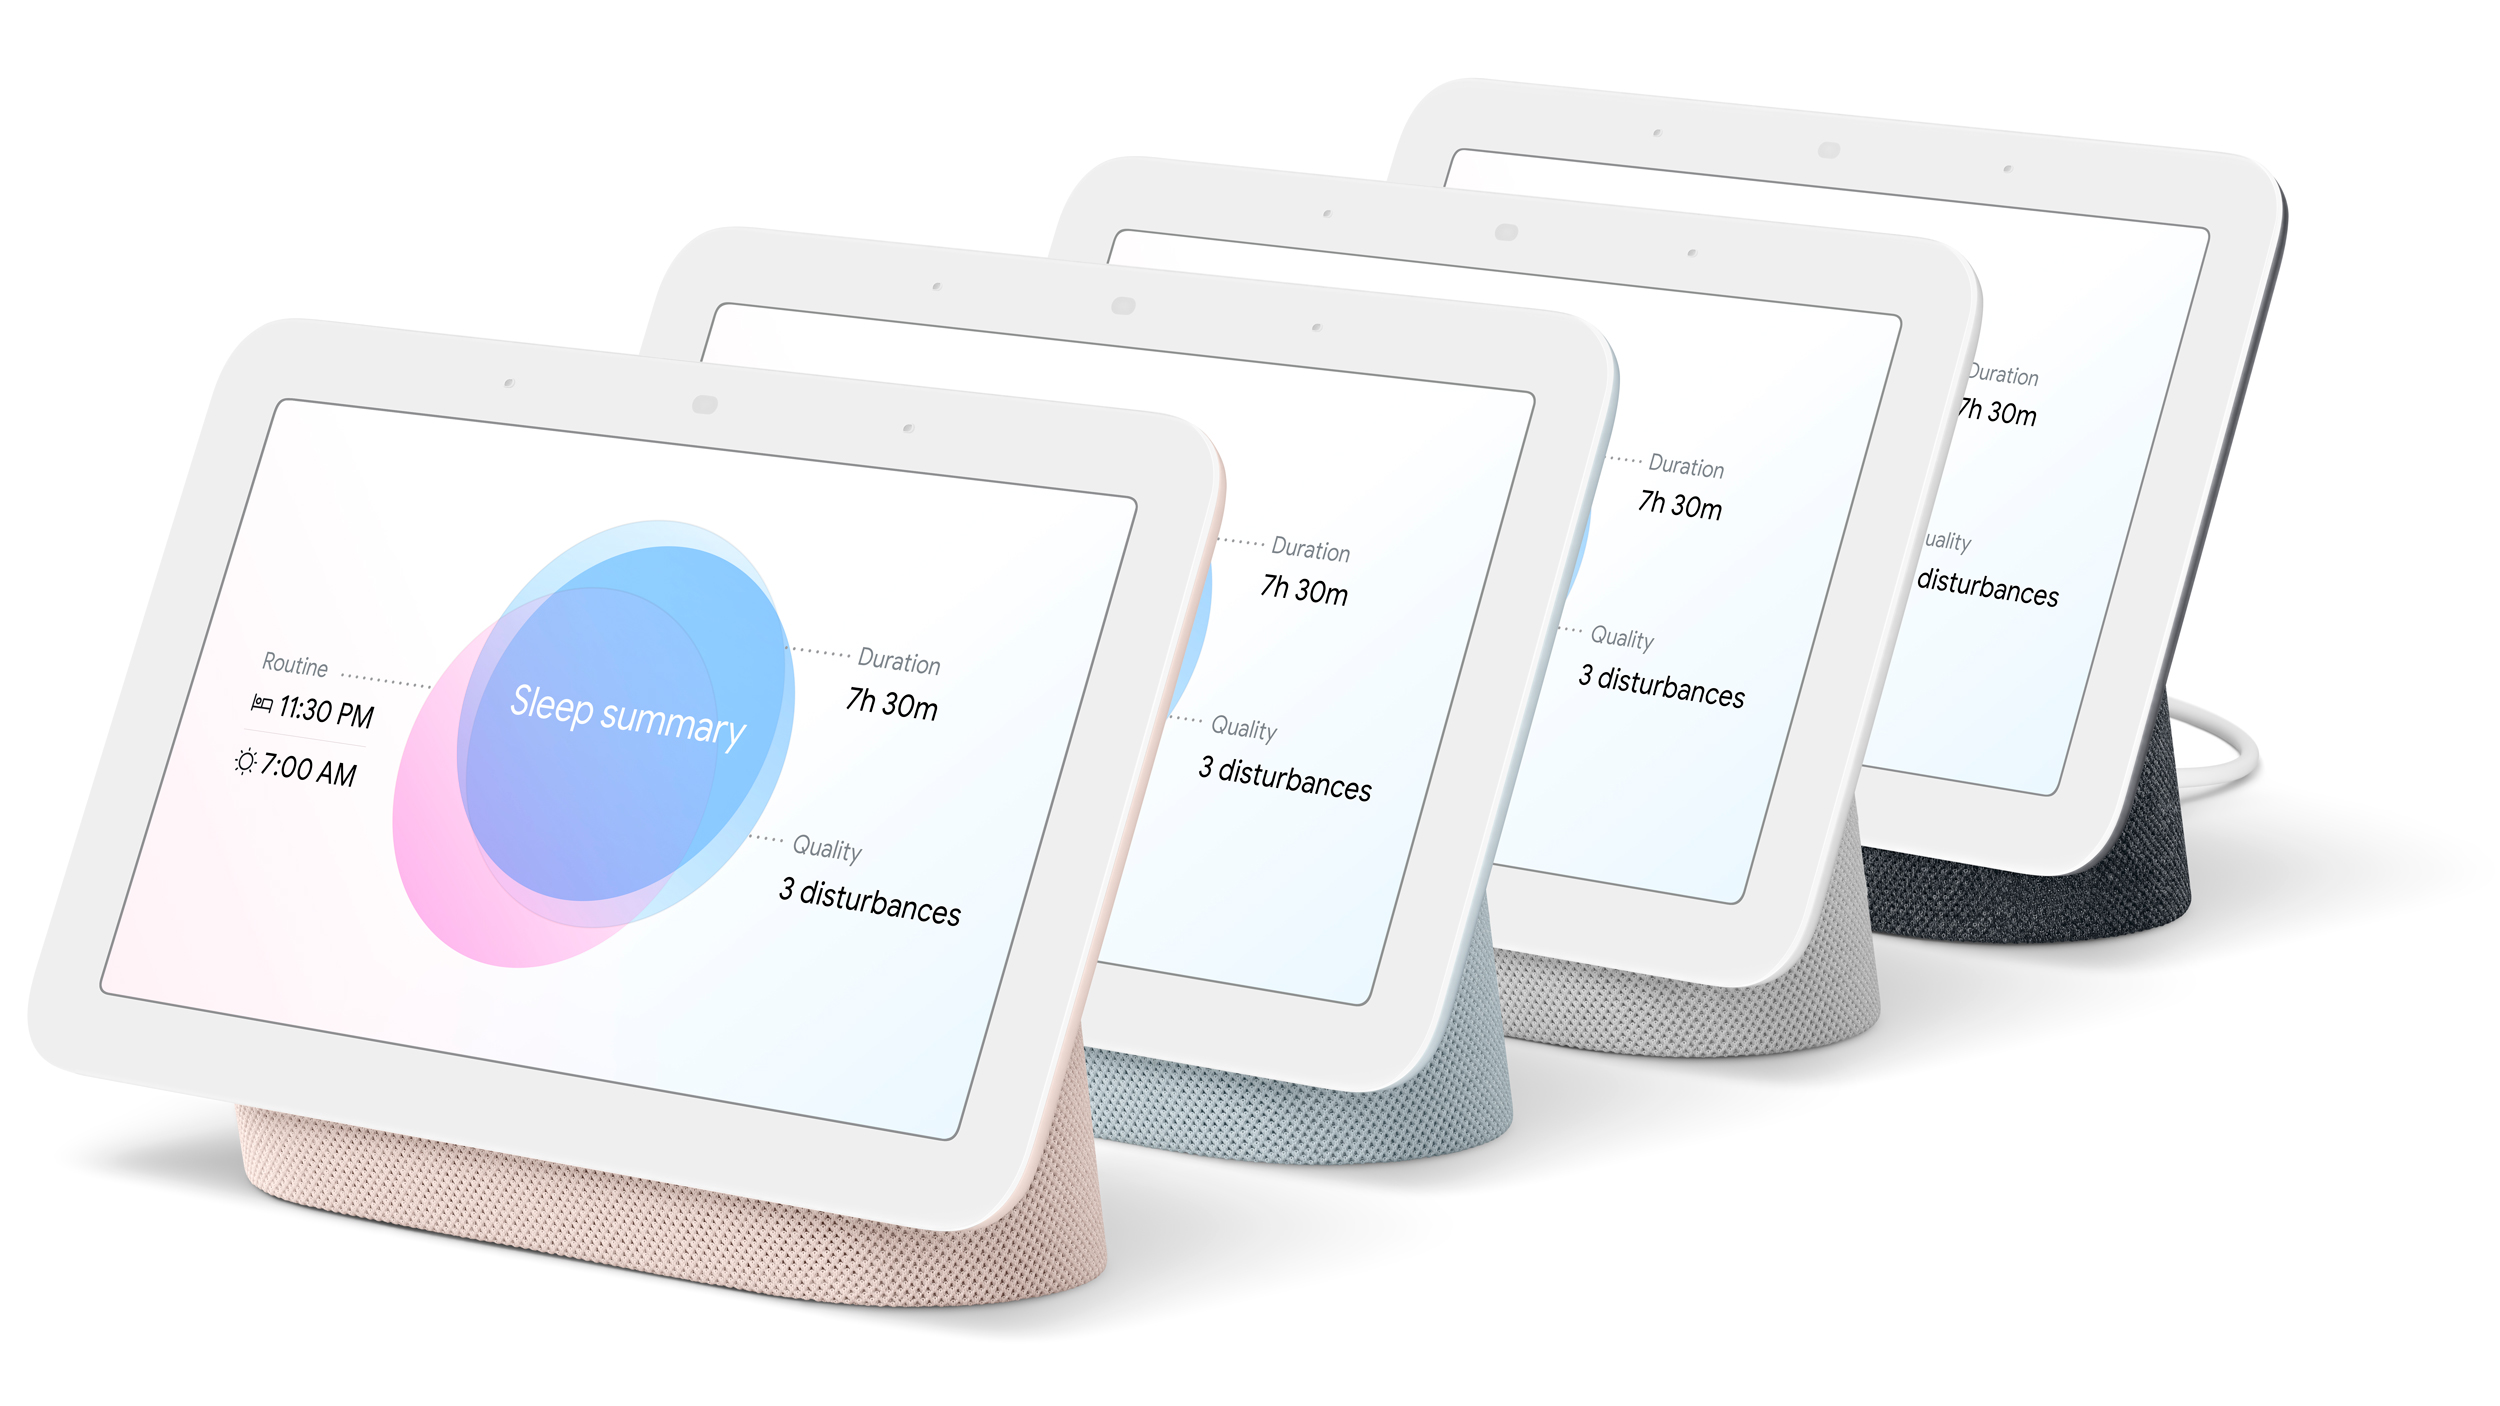 With the new Nest Hub, Google remains committed to offering the most muted, desaturated colour options imaginable. (Image: Google)